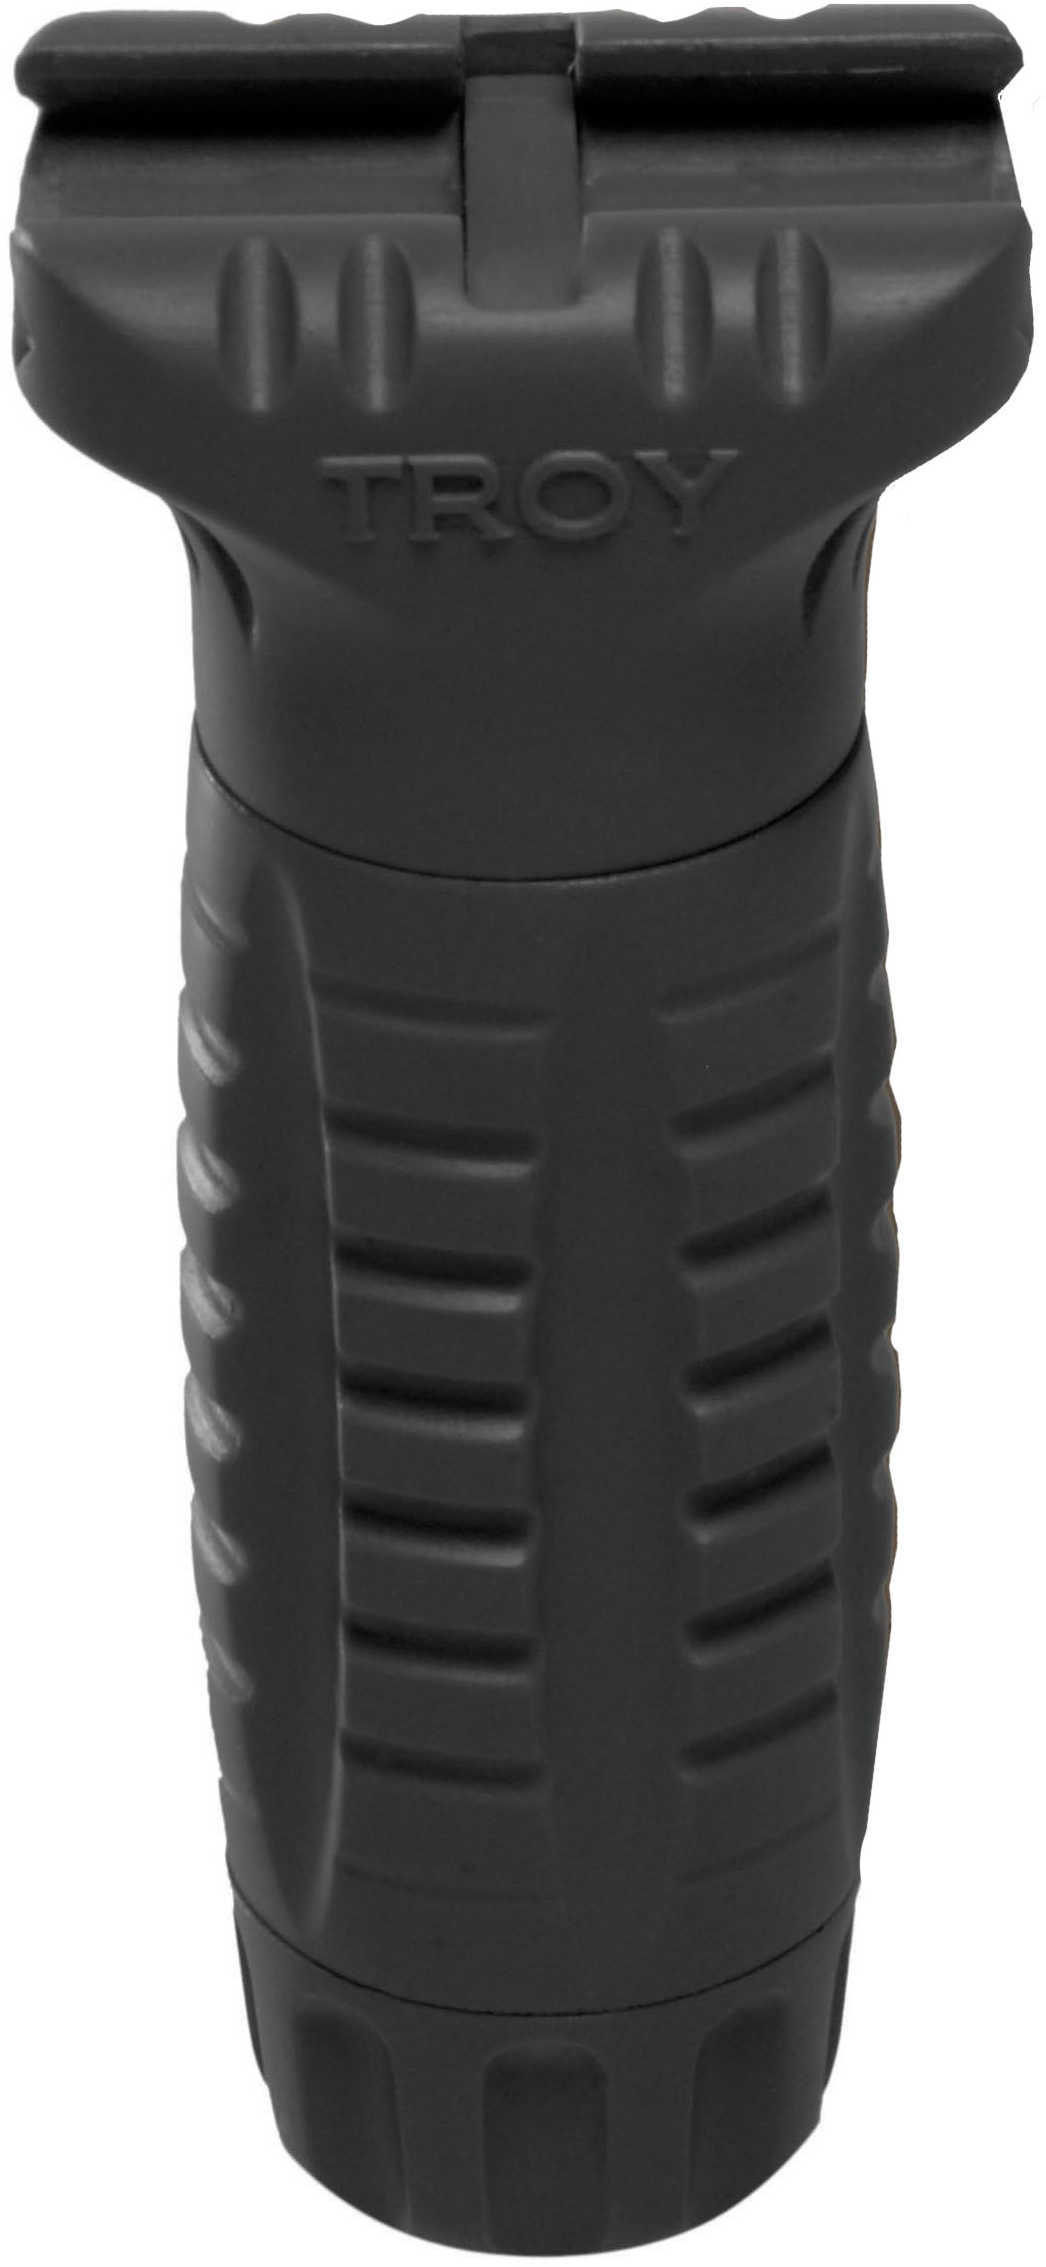 Troy Battle Ax CQB Grip Fits Picatinny Lightweight Polymer Design Waterproof Storage Compartment and Aggressive Ridged P